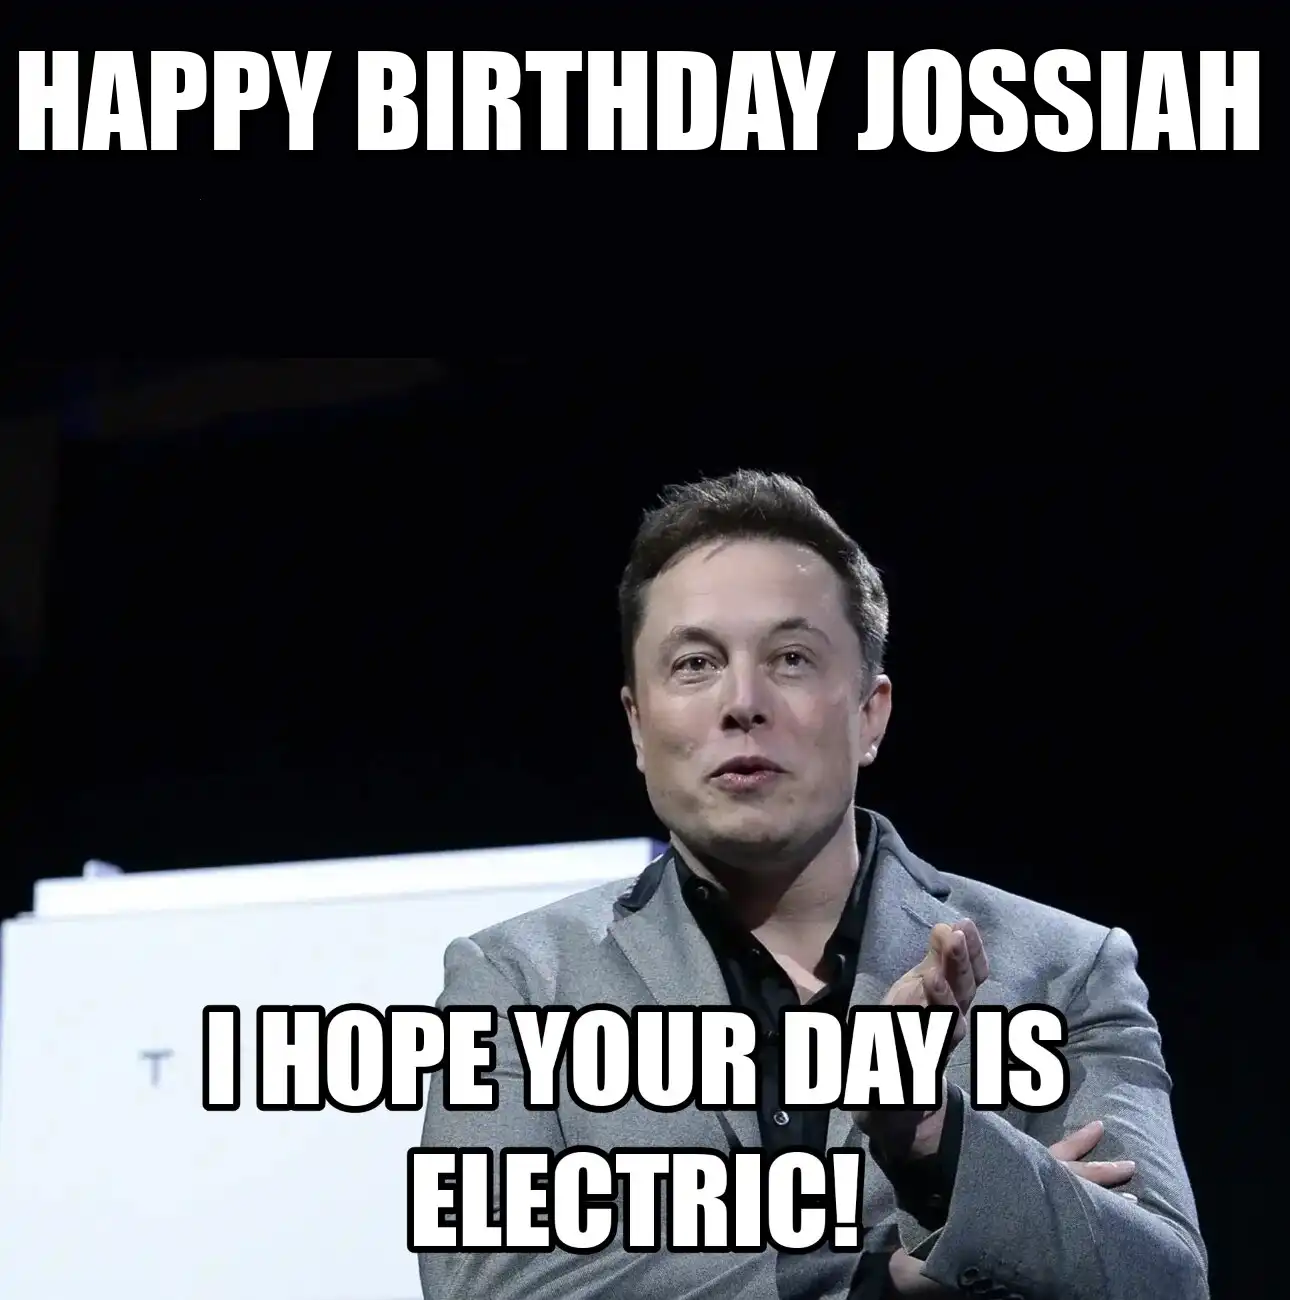 Happy Birthday Jossiah I Hope Your Day Is Electric Meme